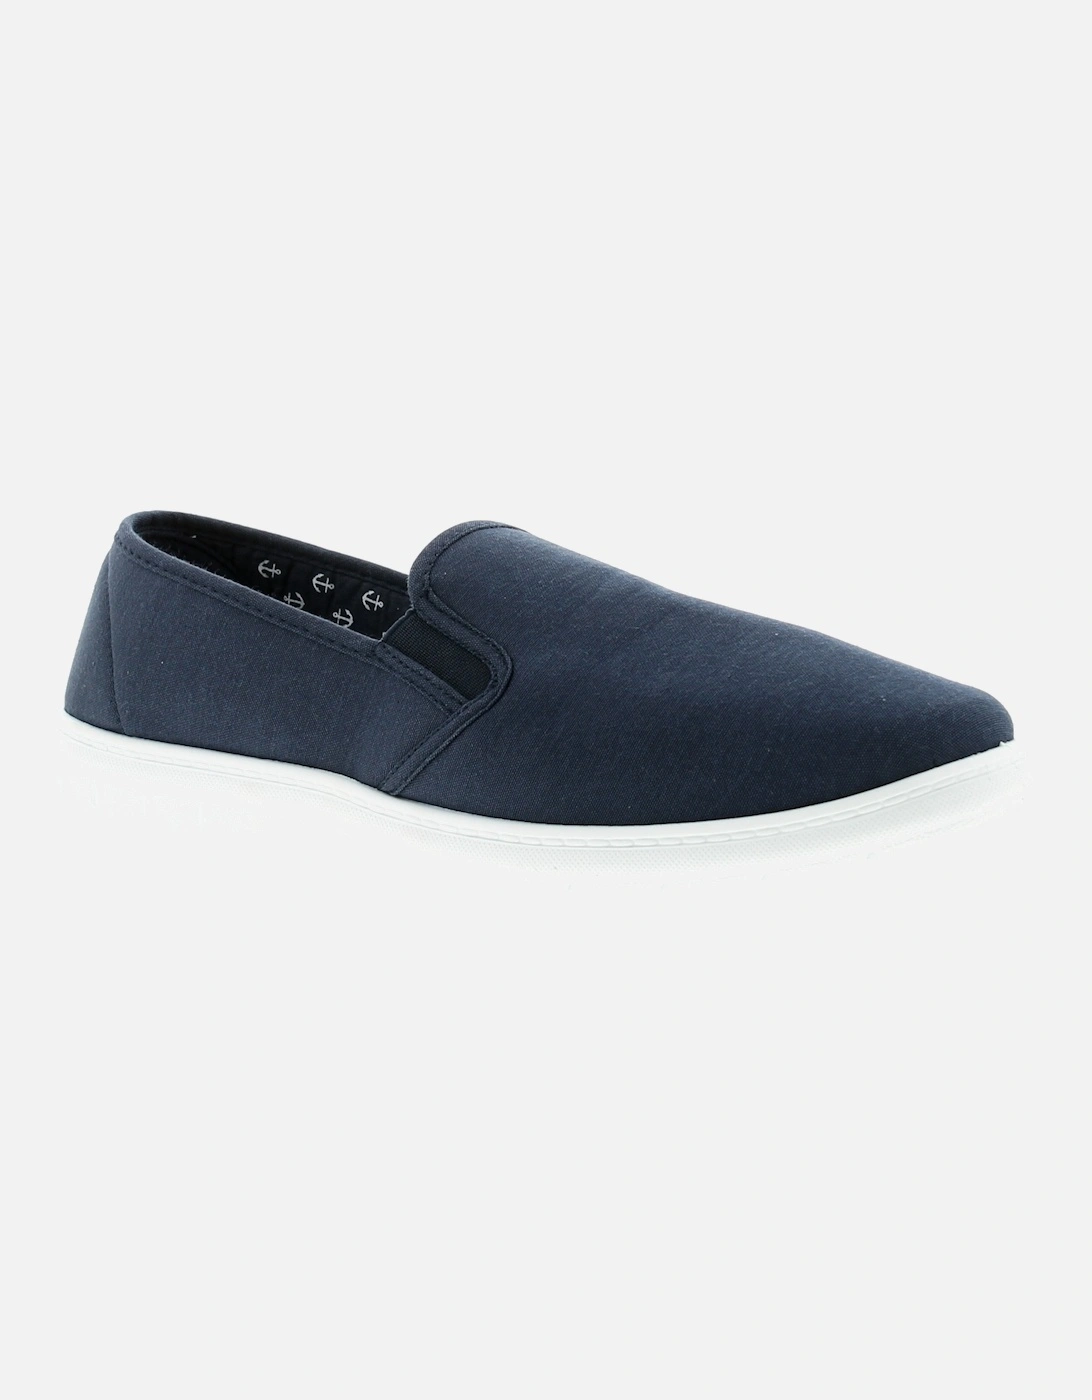 Mens Shoes Canvas Wise Twin Gusset Slip On Navy UK Size, 6 of 5